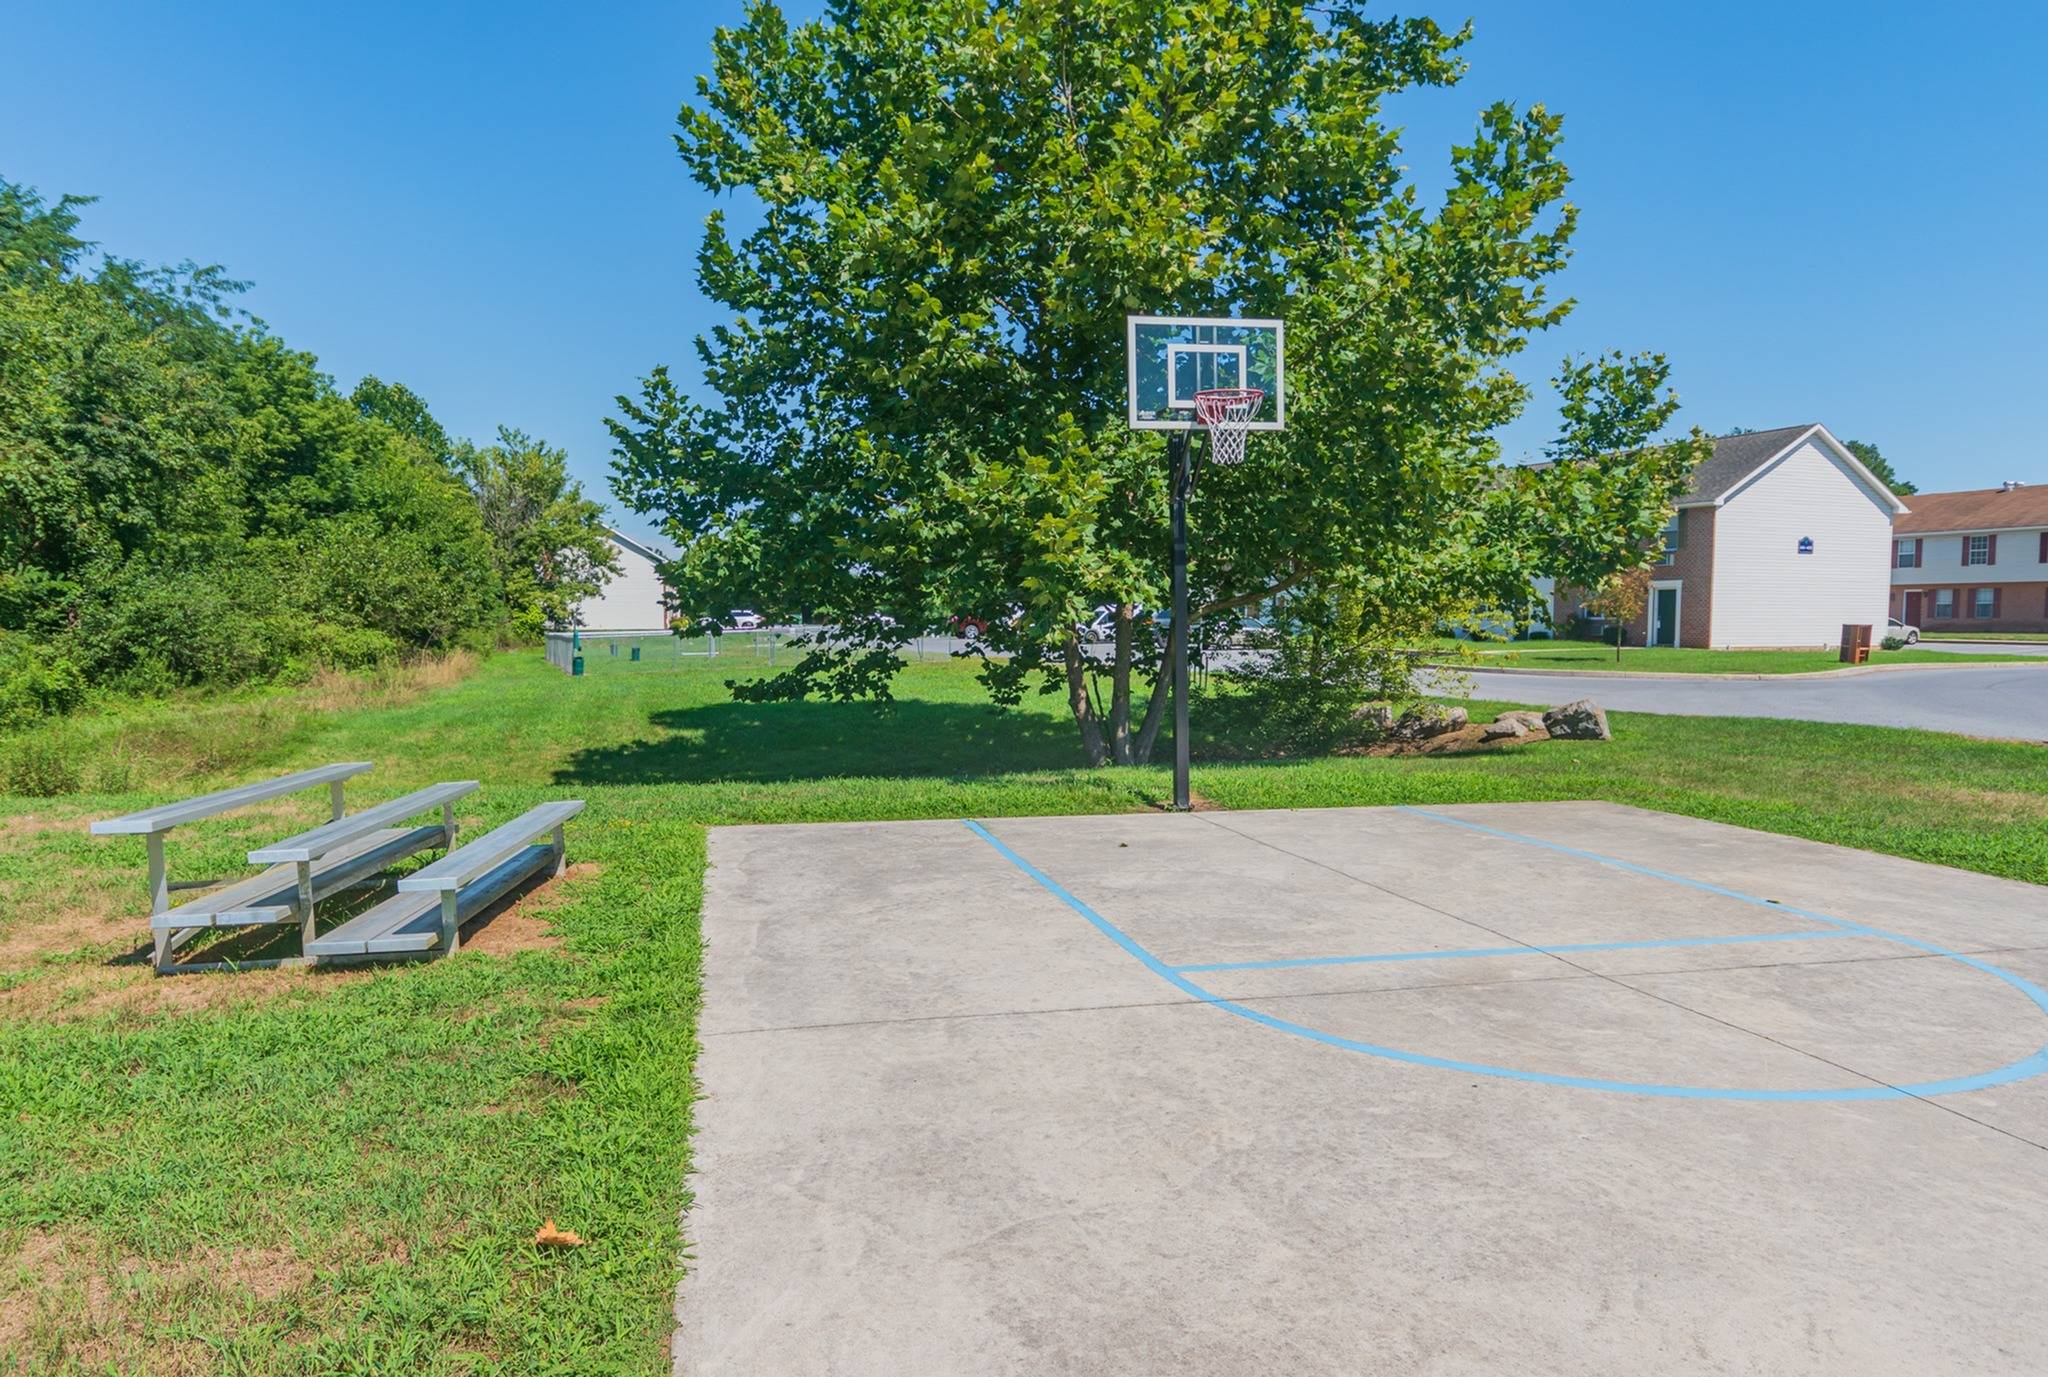 Basketball court with grass beside it.